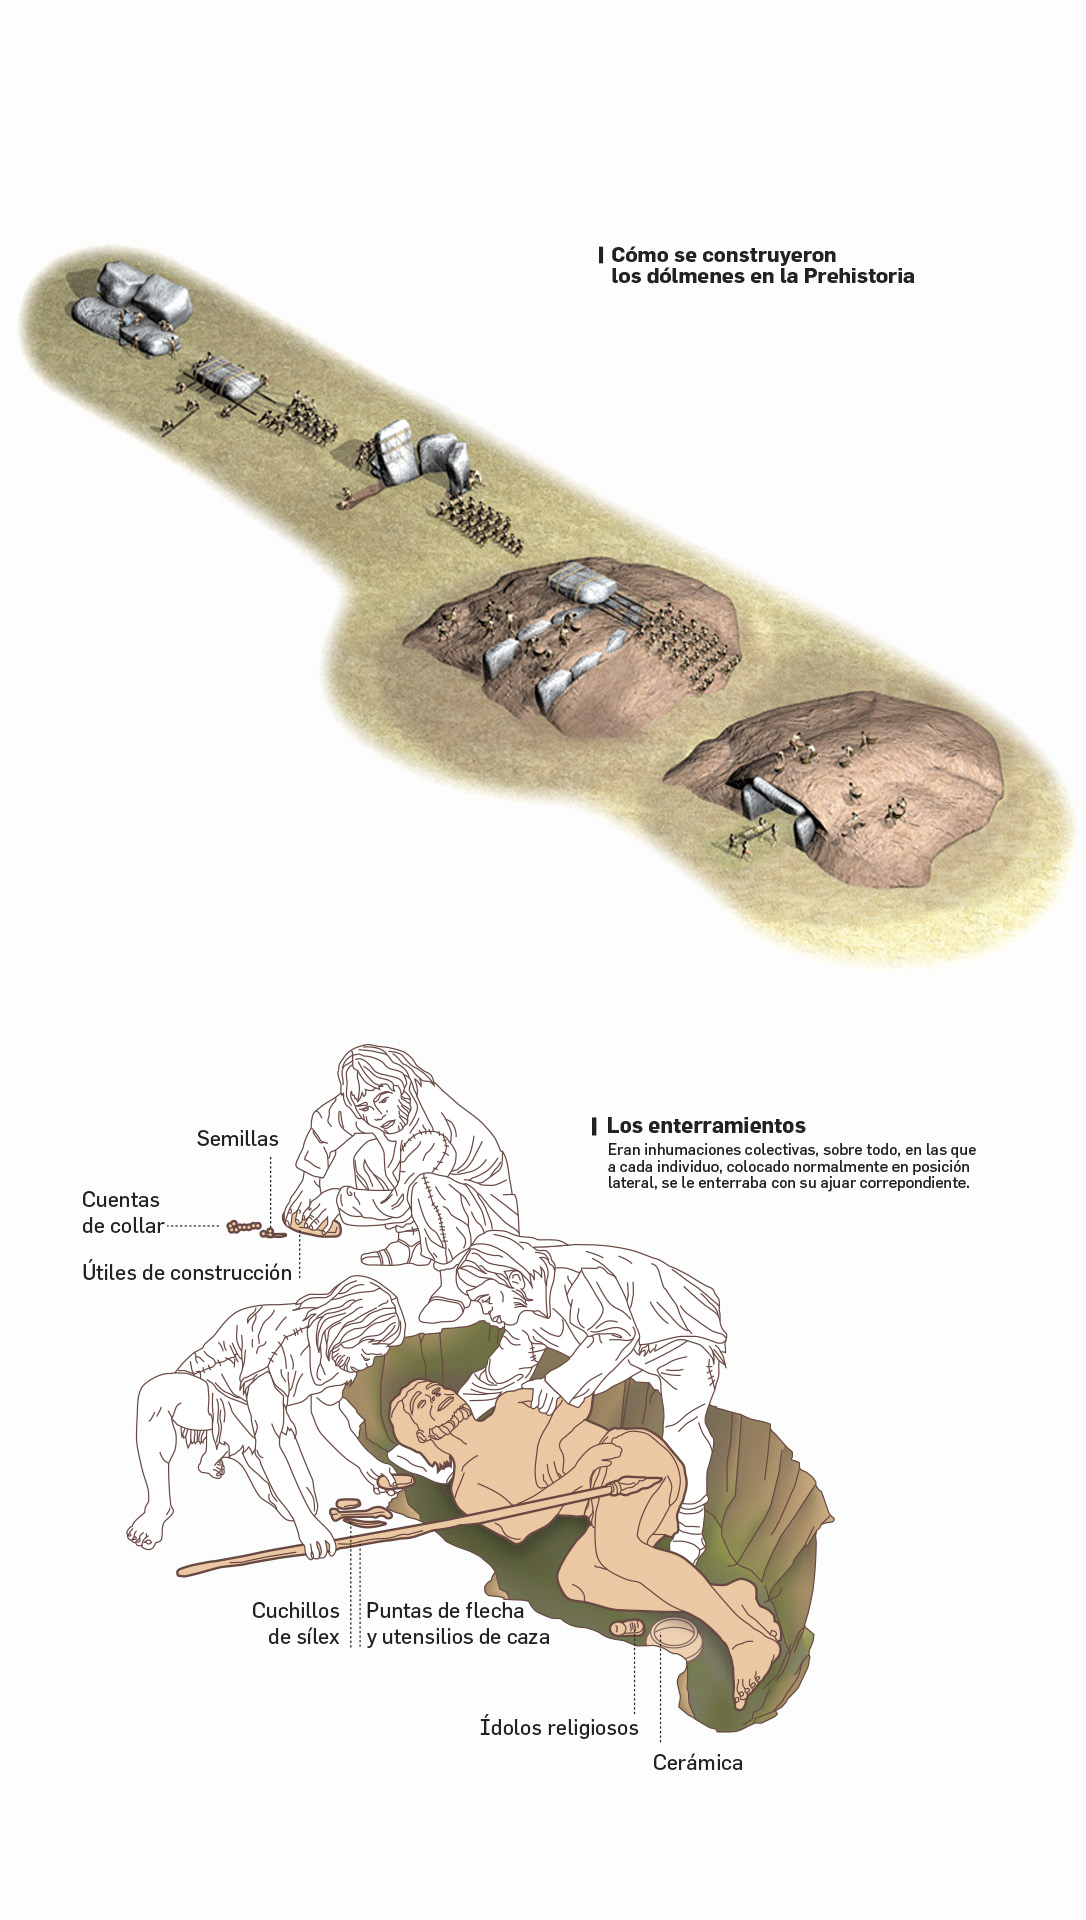 Infographic and data visualization of a dolmen construction